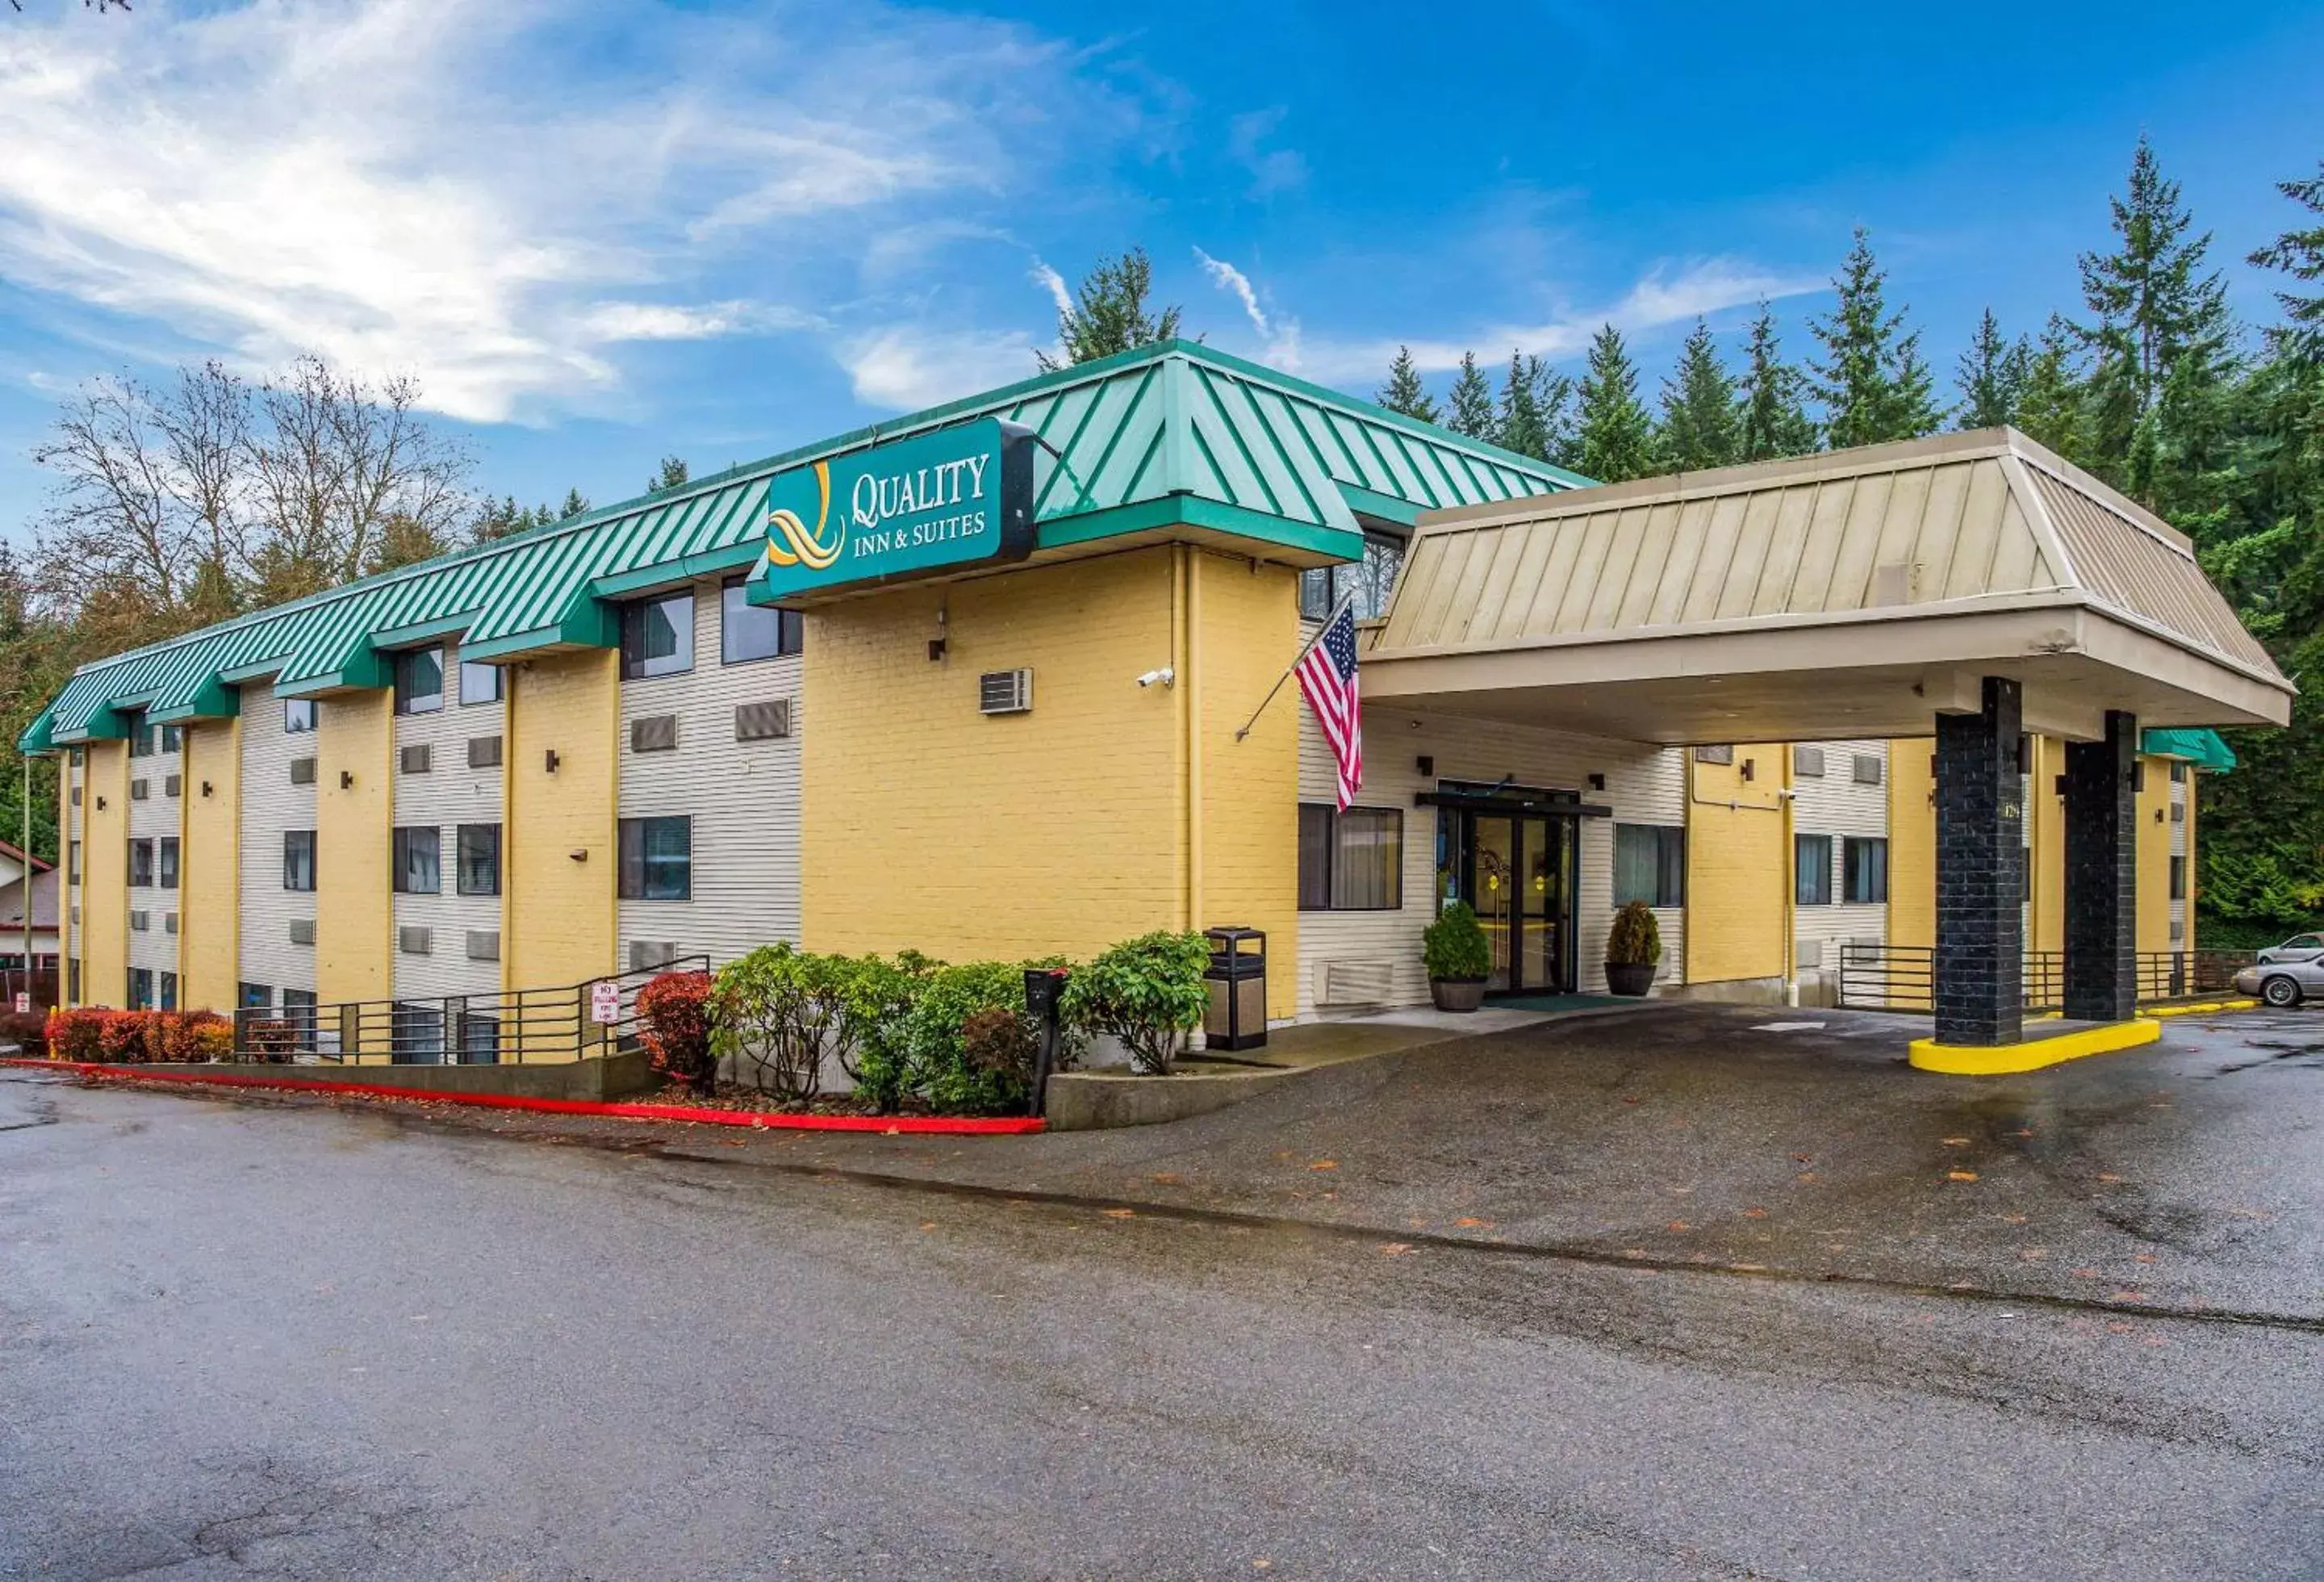 Property building in Quality Inn & Suites Lacey I-5